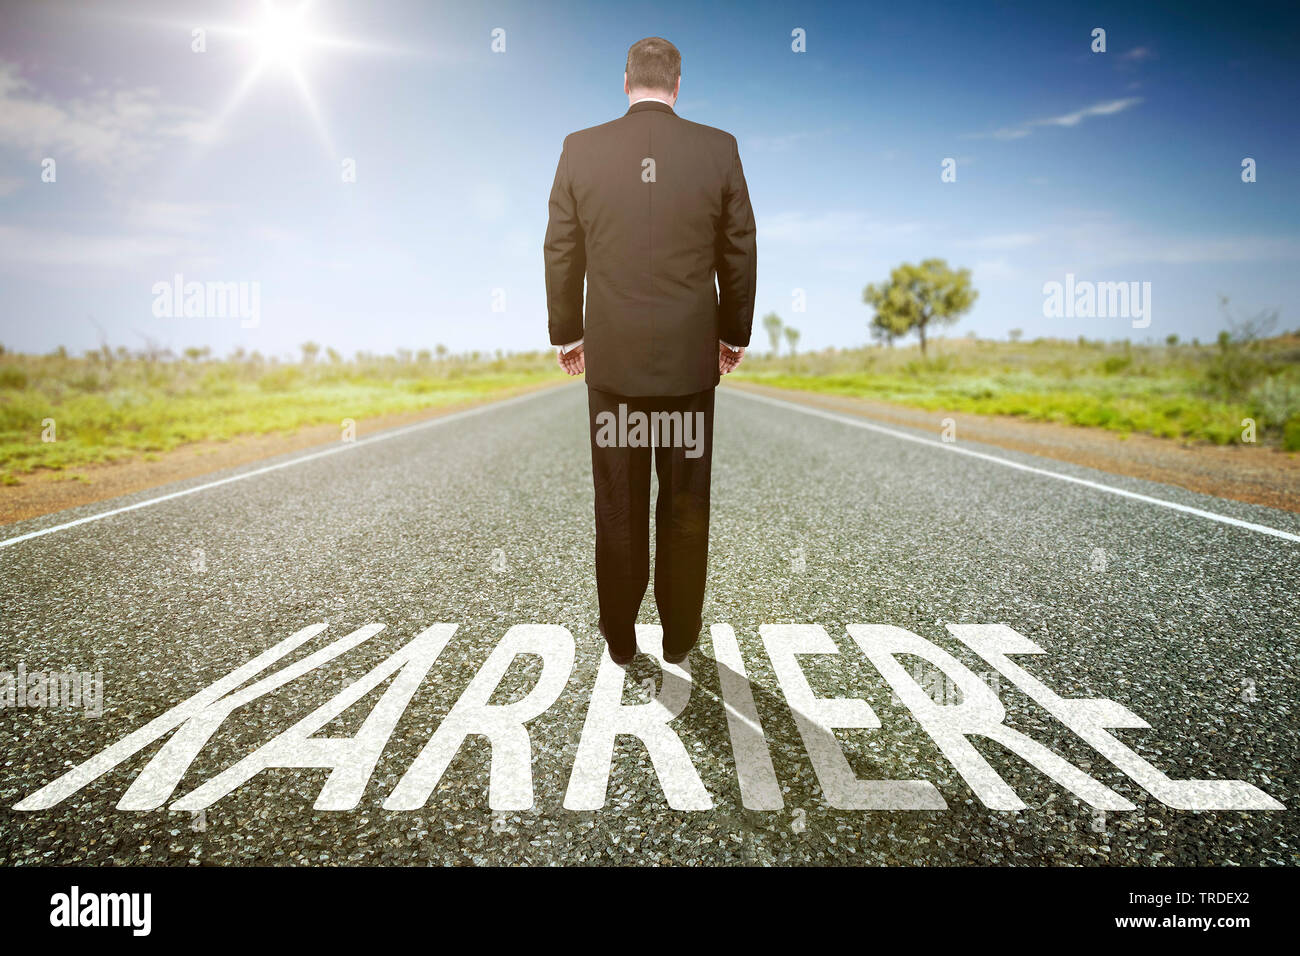 3D computer graphic, person standing on a straight highway section representing a path to a defined goal lettering KARRIERE (CAREER) Stock Photo